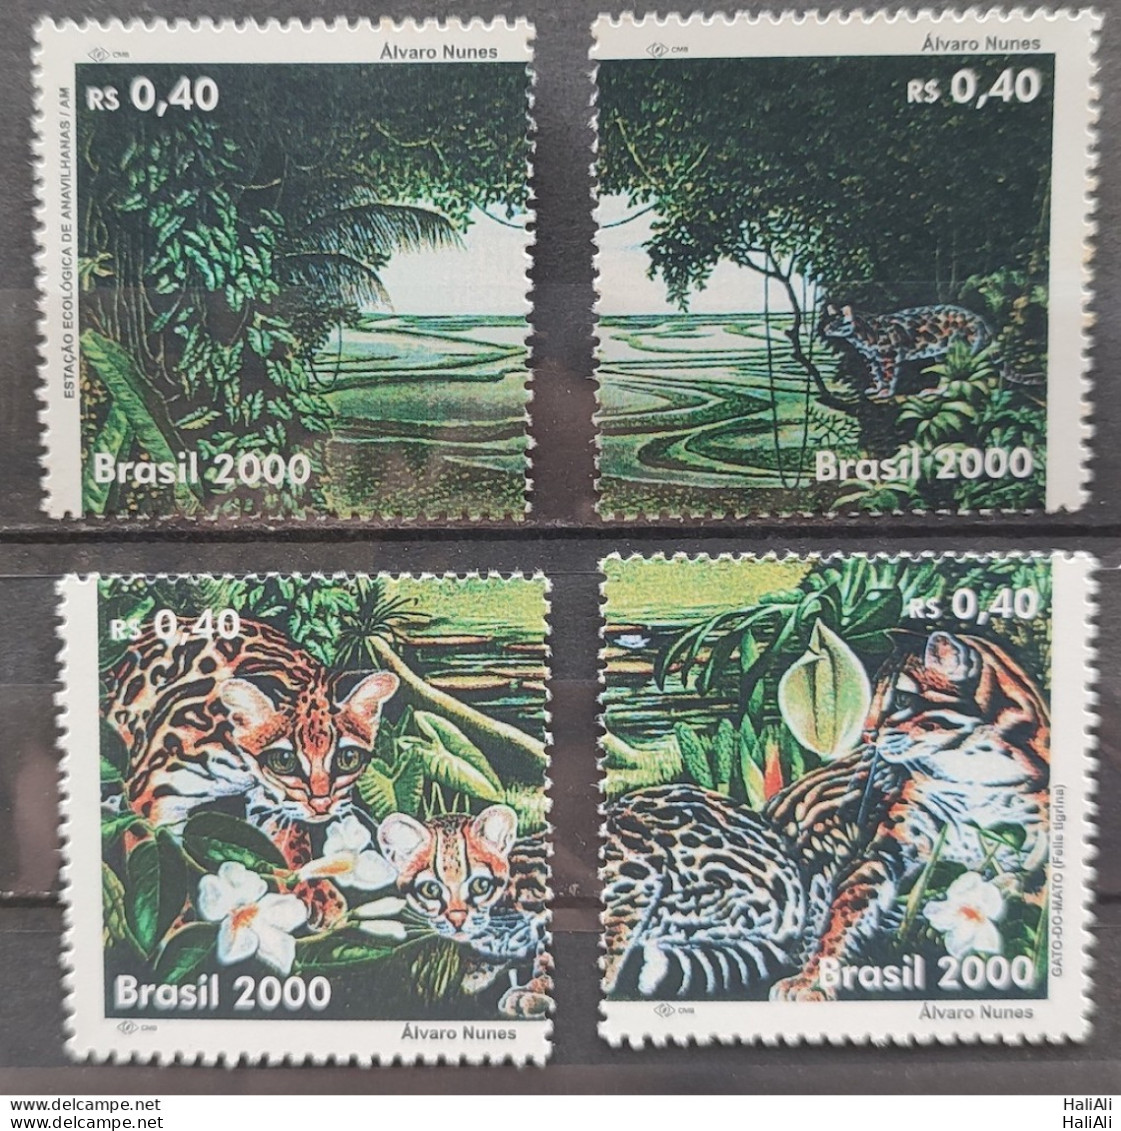 C 2285 Brazil Stamp Preservation Of The Environment Expo Cat Jaguar 2000 Complete Series Separate - Neufs